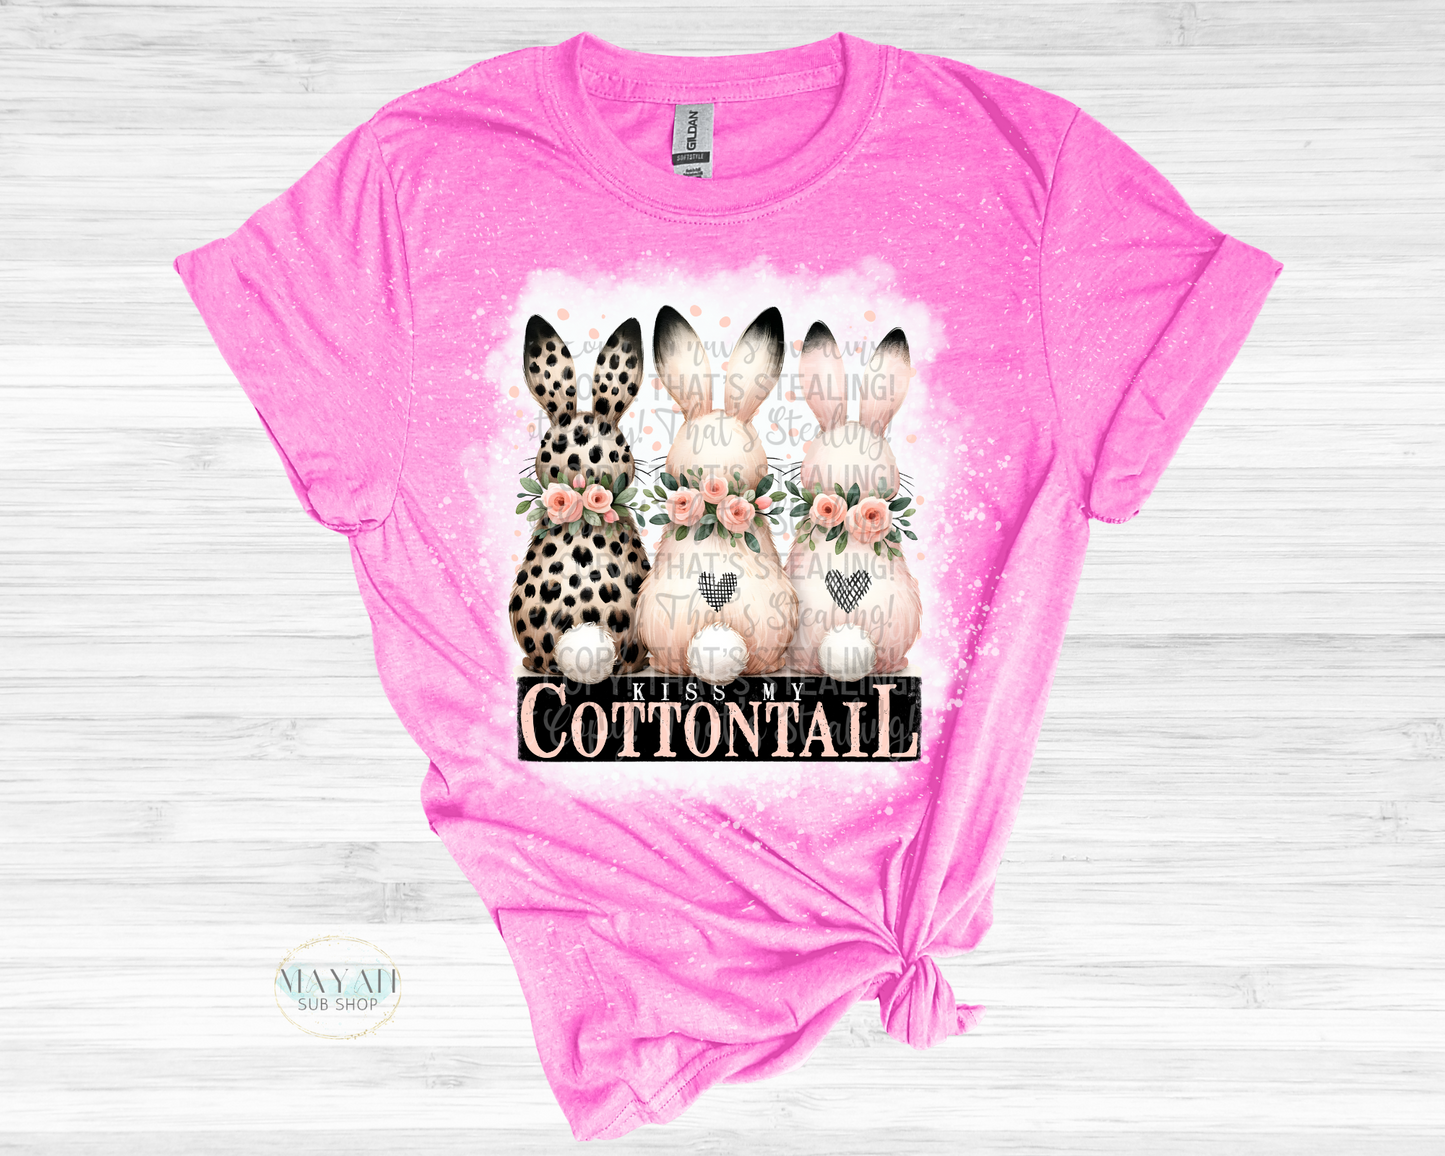 Kiss My Cottontail Bleached Tee - Mayan Sub Shop